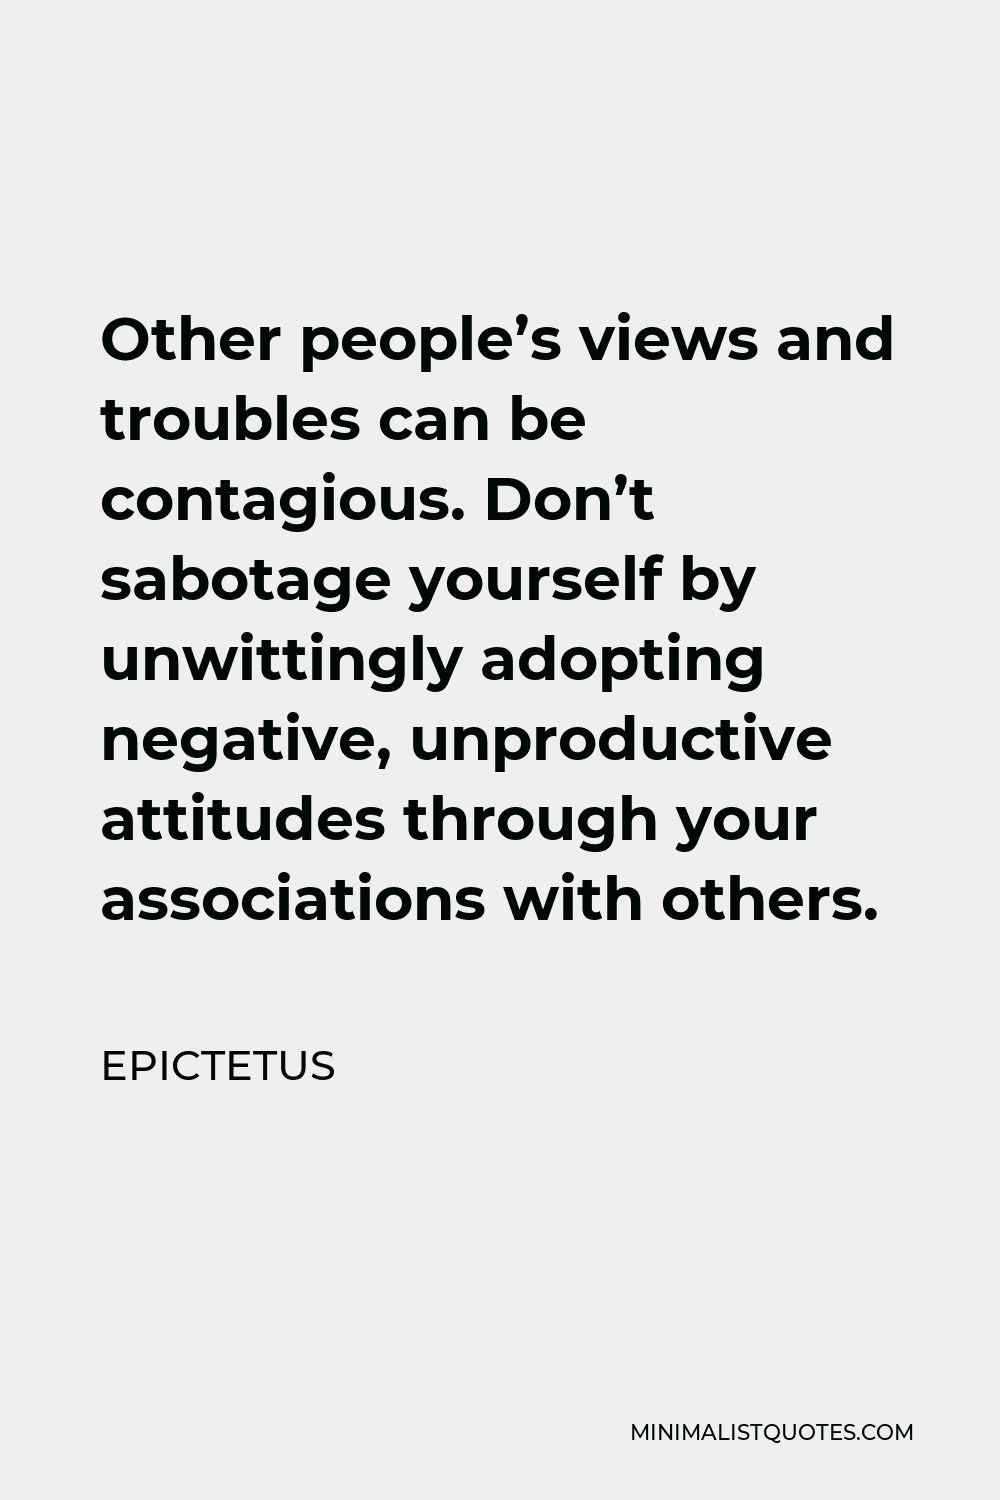 Epictetus Quote - Other people’s views and troubles can be contagious. Don’t sabotage yourself by unwittingly adopting negative, unproductive attitudes through your associations with others.